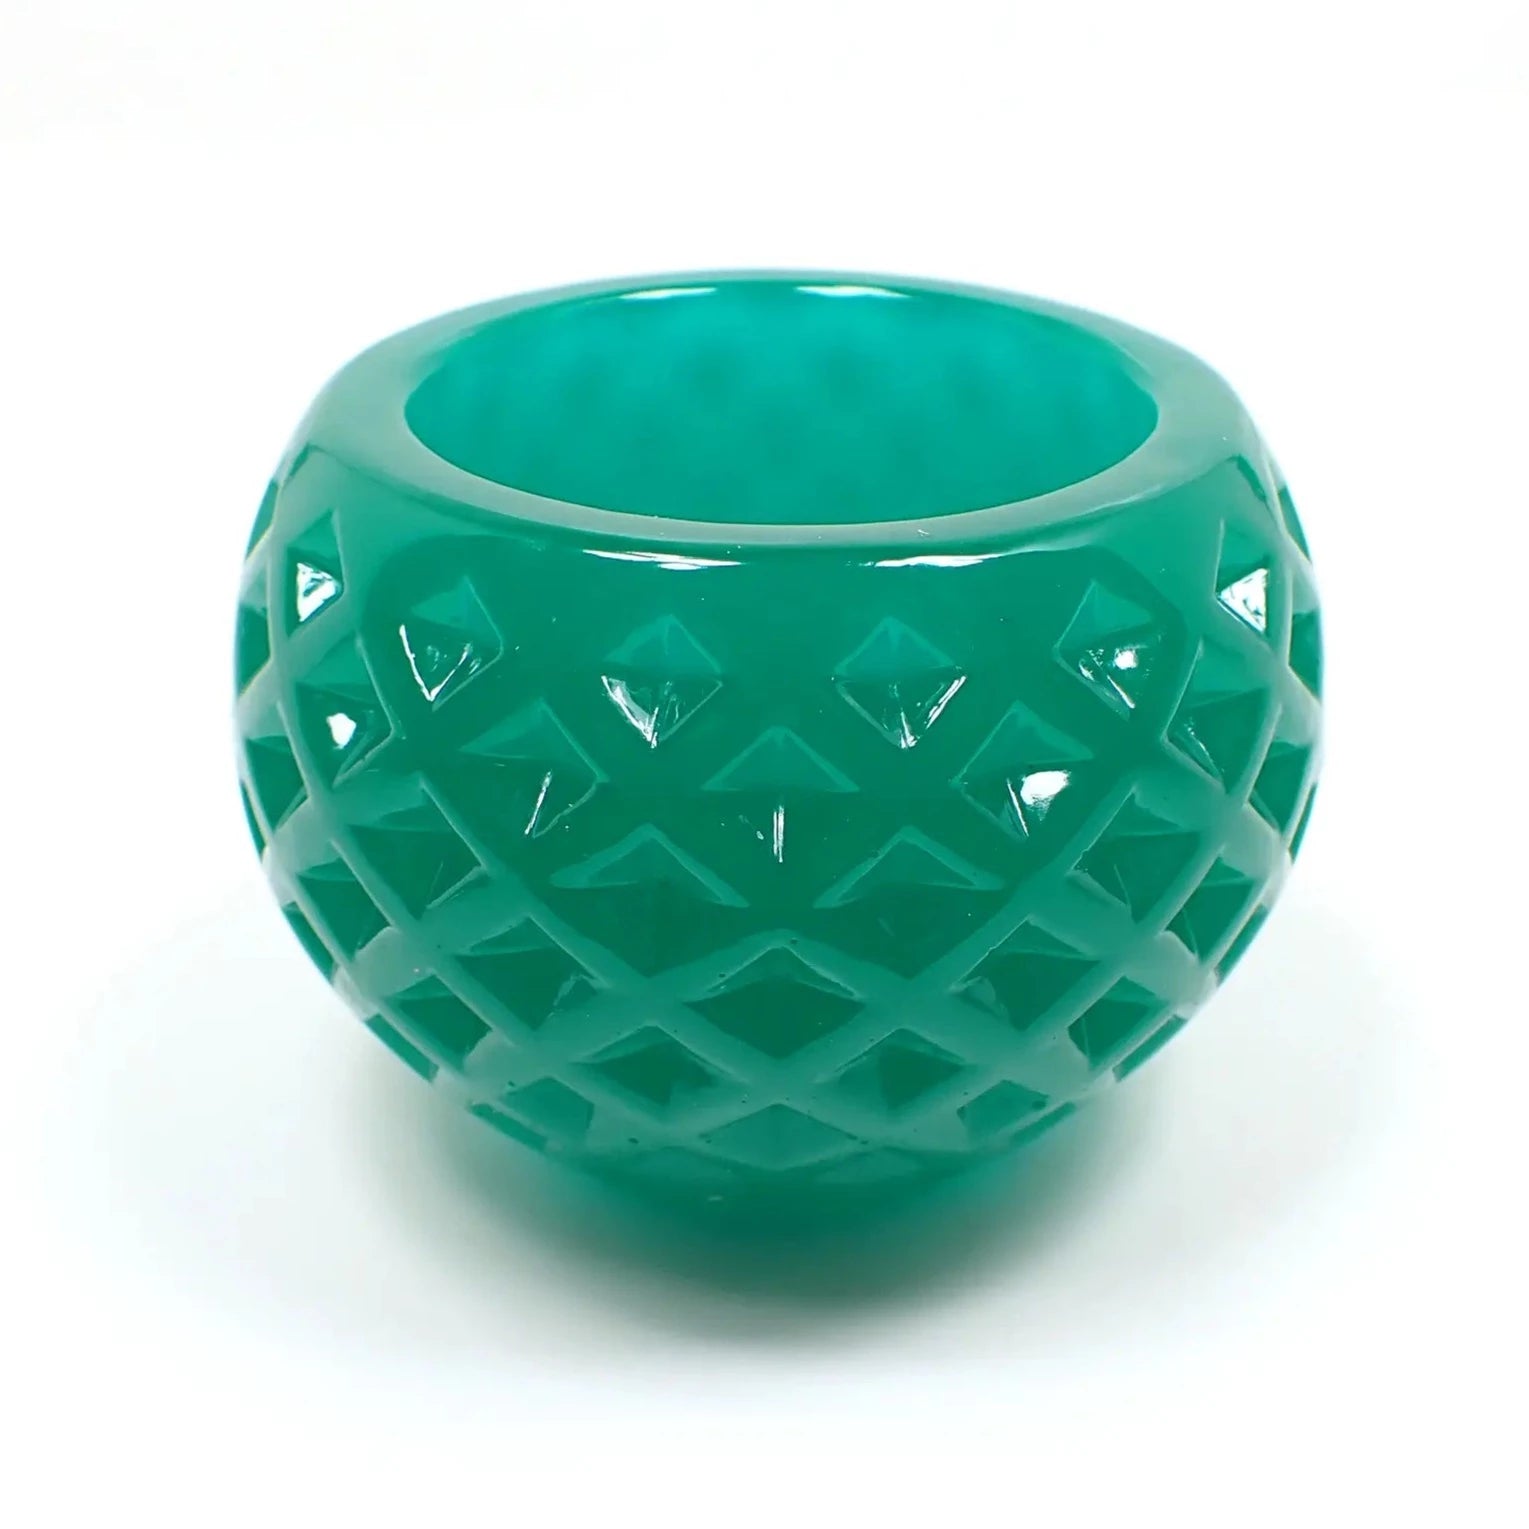 Side view of the small handmade resin succulent pot. In this lighting it's showing as teal green. It is round shaped the an indented diamond shape pattern design all the way around it.